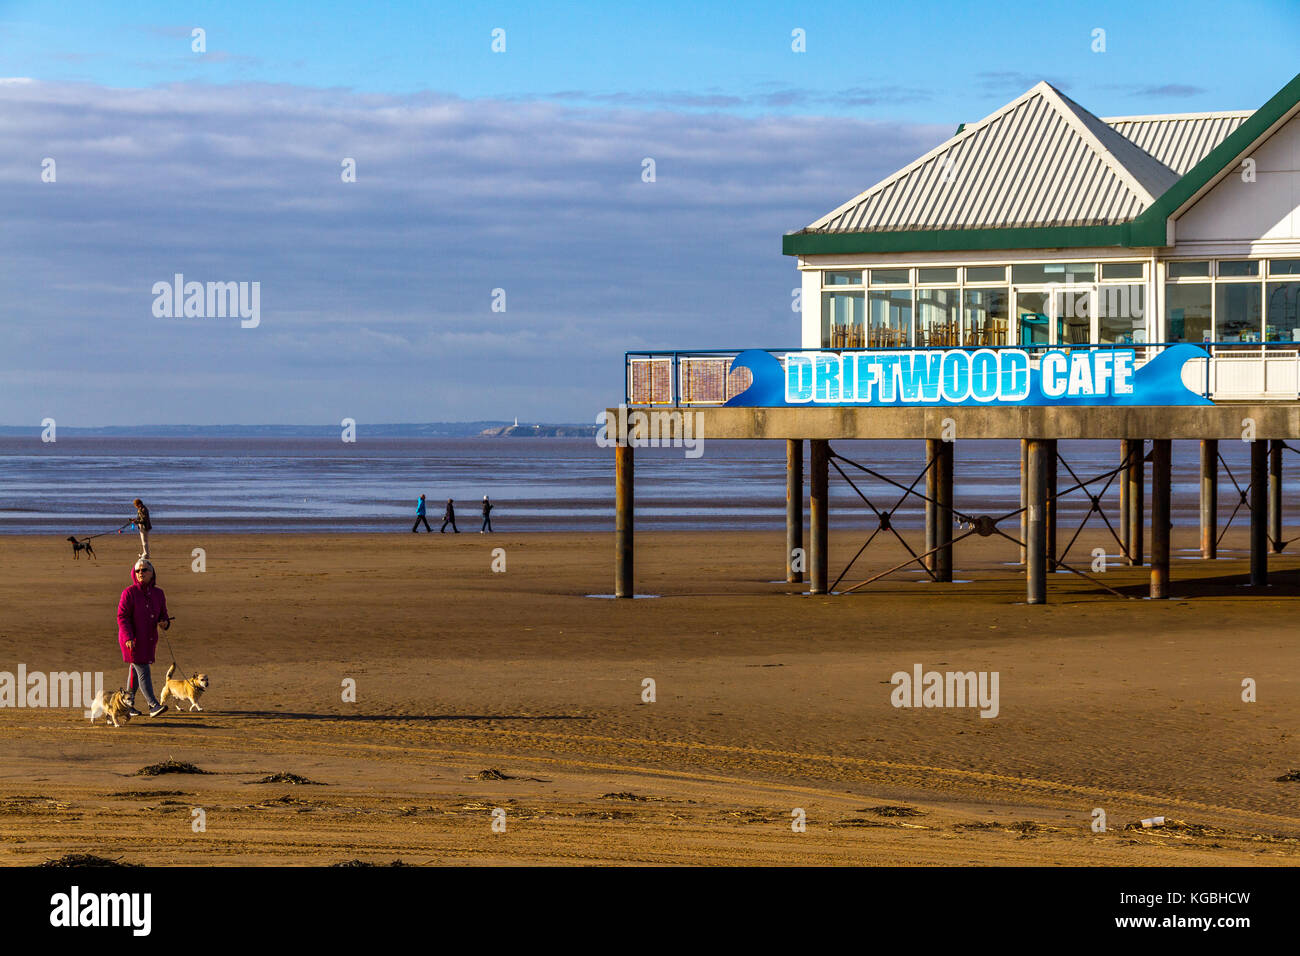 People walking on the beach on a sunny November afternoon beside the Driftwood Cafe and Sealife Centre builidng at Weston-Super-Mare, Somerset, Avon, England, UK. 06th Nov, 2017. Stock Photo